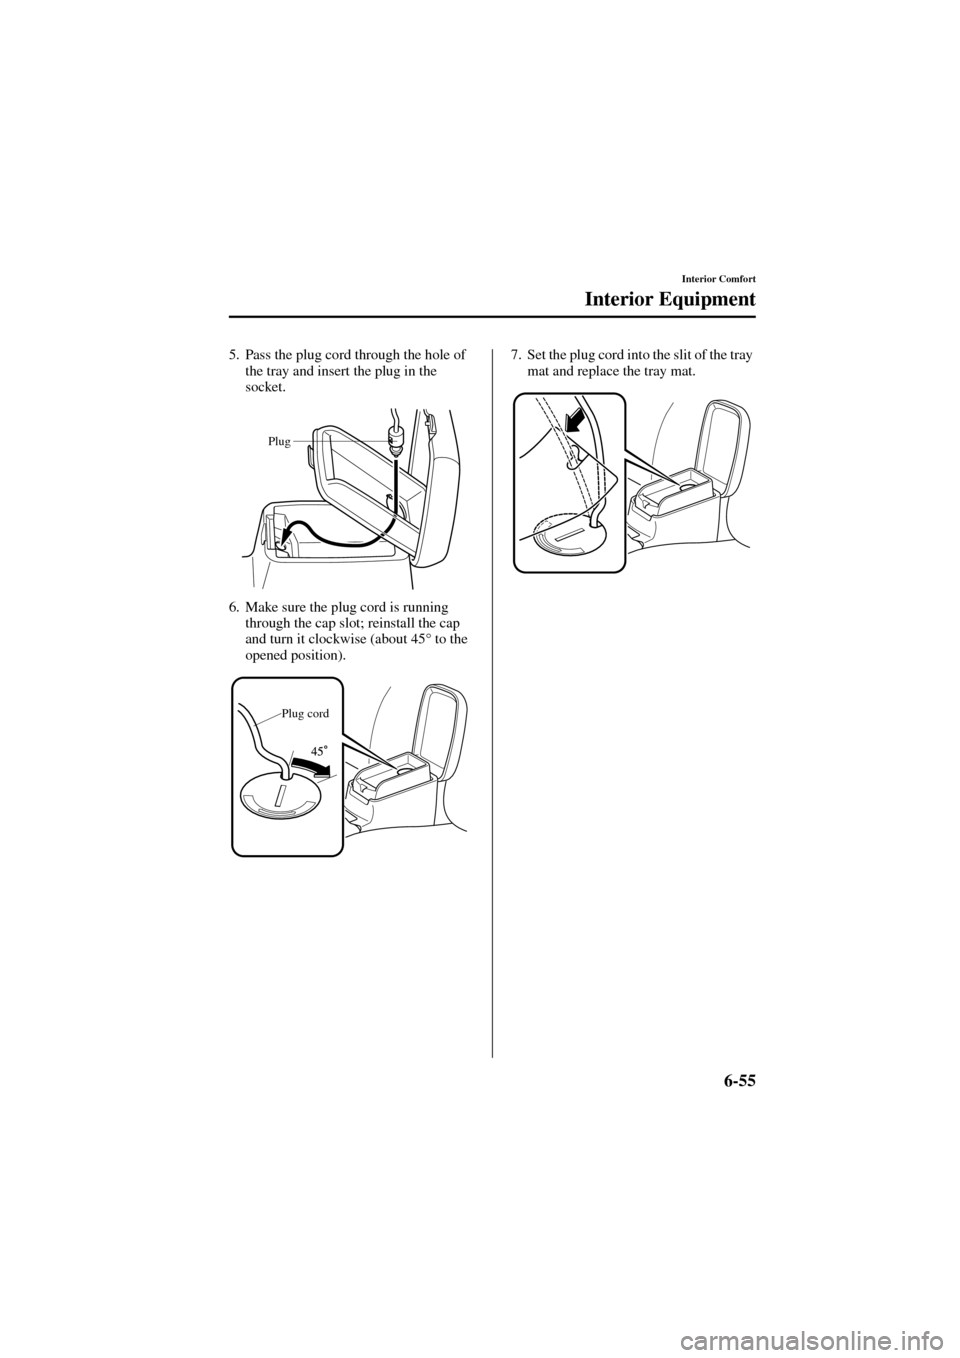 MAZDA MODEL 6 2004  Owners Manual (in English) 6-55
Interior Comfort
Interior Equipment
Form No. 8R29-EA-02I
5. Pass the plug cord through the hole of 
the tray and insert the plug in the 
socket.
6. Make sure the plug cord is running 
through the